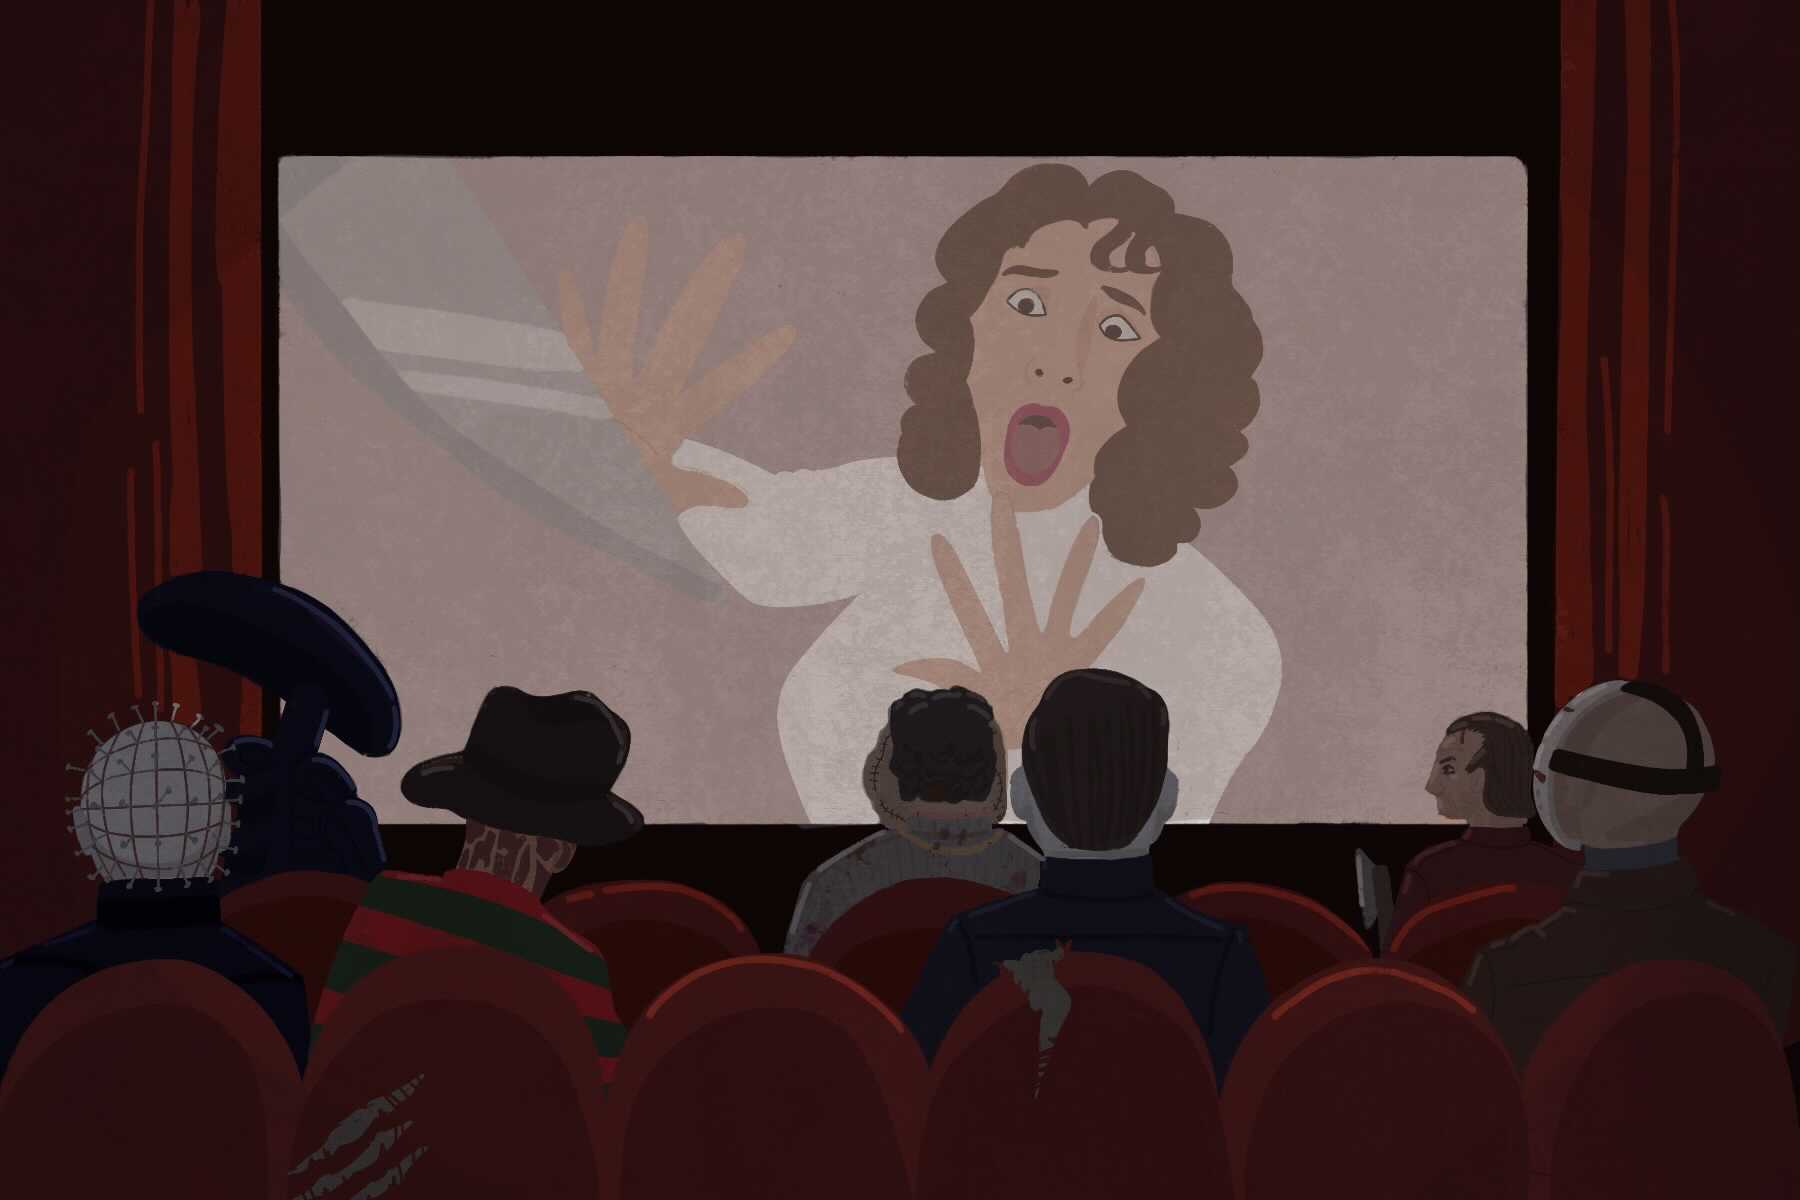 Horror movie characters sit in a movie theater, watching a girl and knife